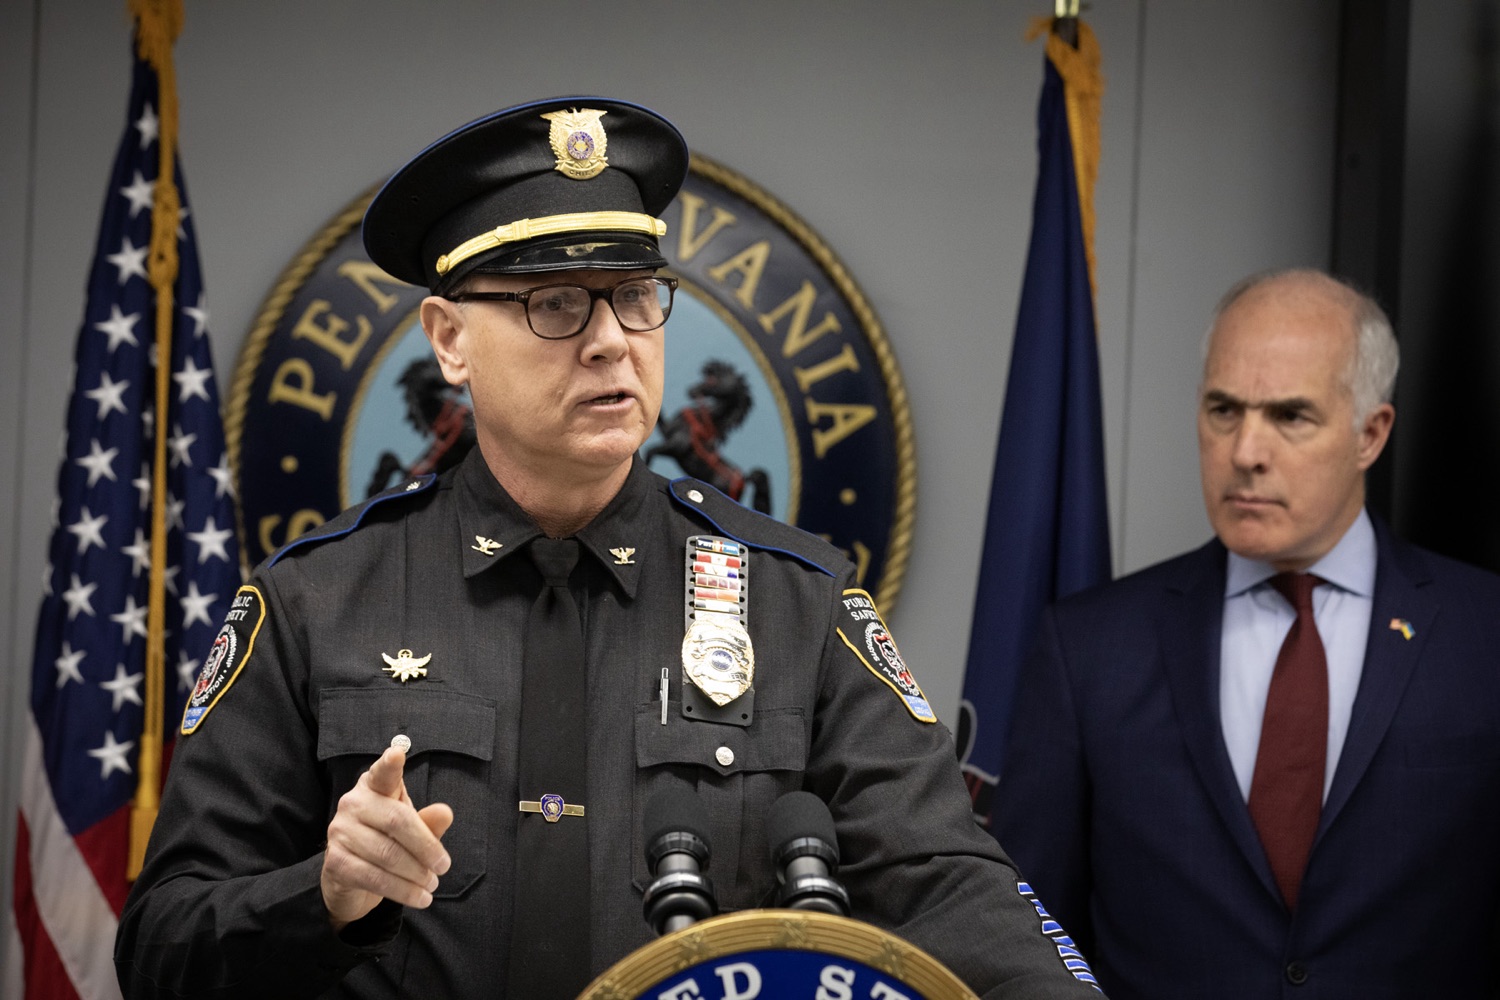 Senator Bob Casey visited Pennsylvania State Police Headquarters to discuss his proposed Stop Fentanyl at the Border Act. Pictured here is Susquehanna Twp. Public Safety Director Rob Martin delivering remarks during the event. Harrisburg, Pennsylvania.<br><a href="https://filesource.amperwave.net/commonwealthofpa/photo/24347_psp_stopFentanyl_JP_13.jpg" target="_blank">⇣ Download Photo</a>